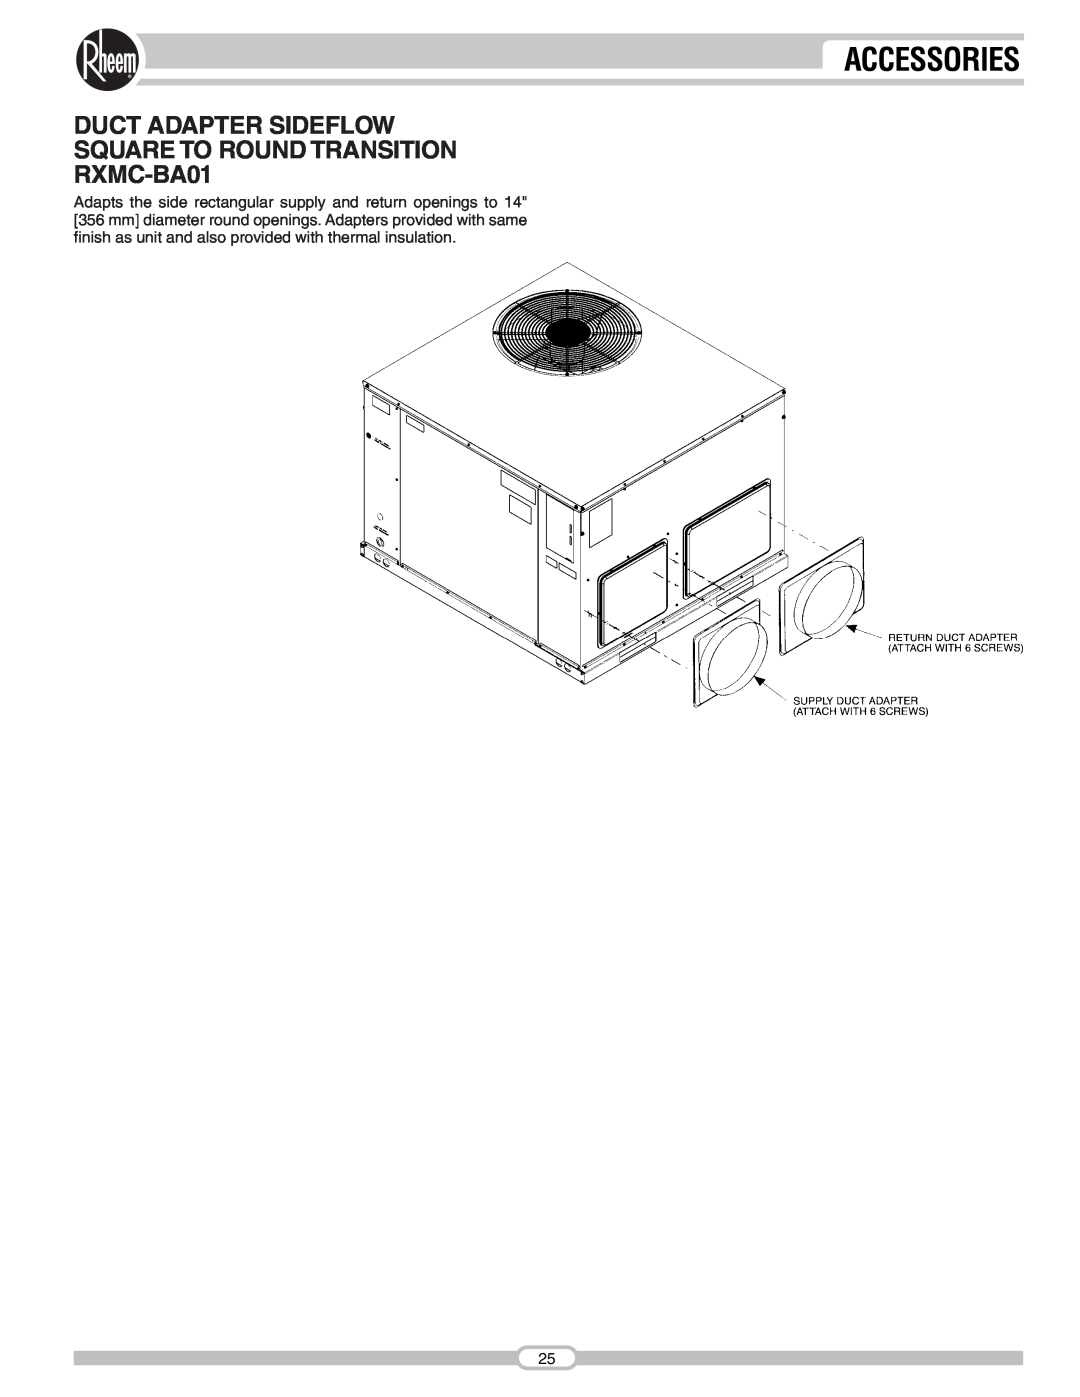 Rheem RSNA-B Series manual Duct Adapter Sideflow Square To Round Transition, RXMC-BA01, Accessories 